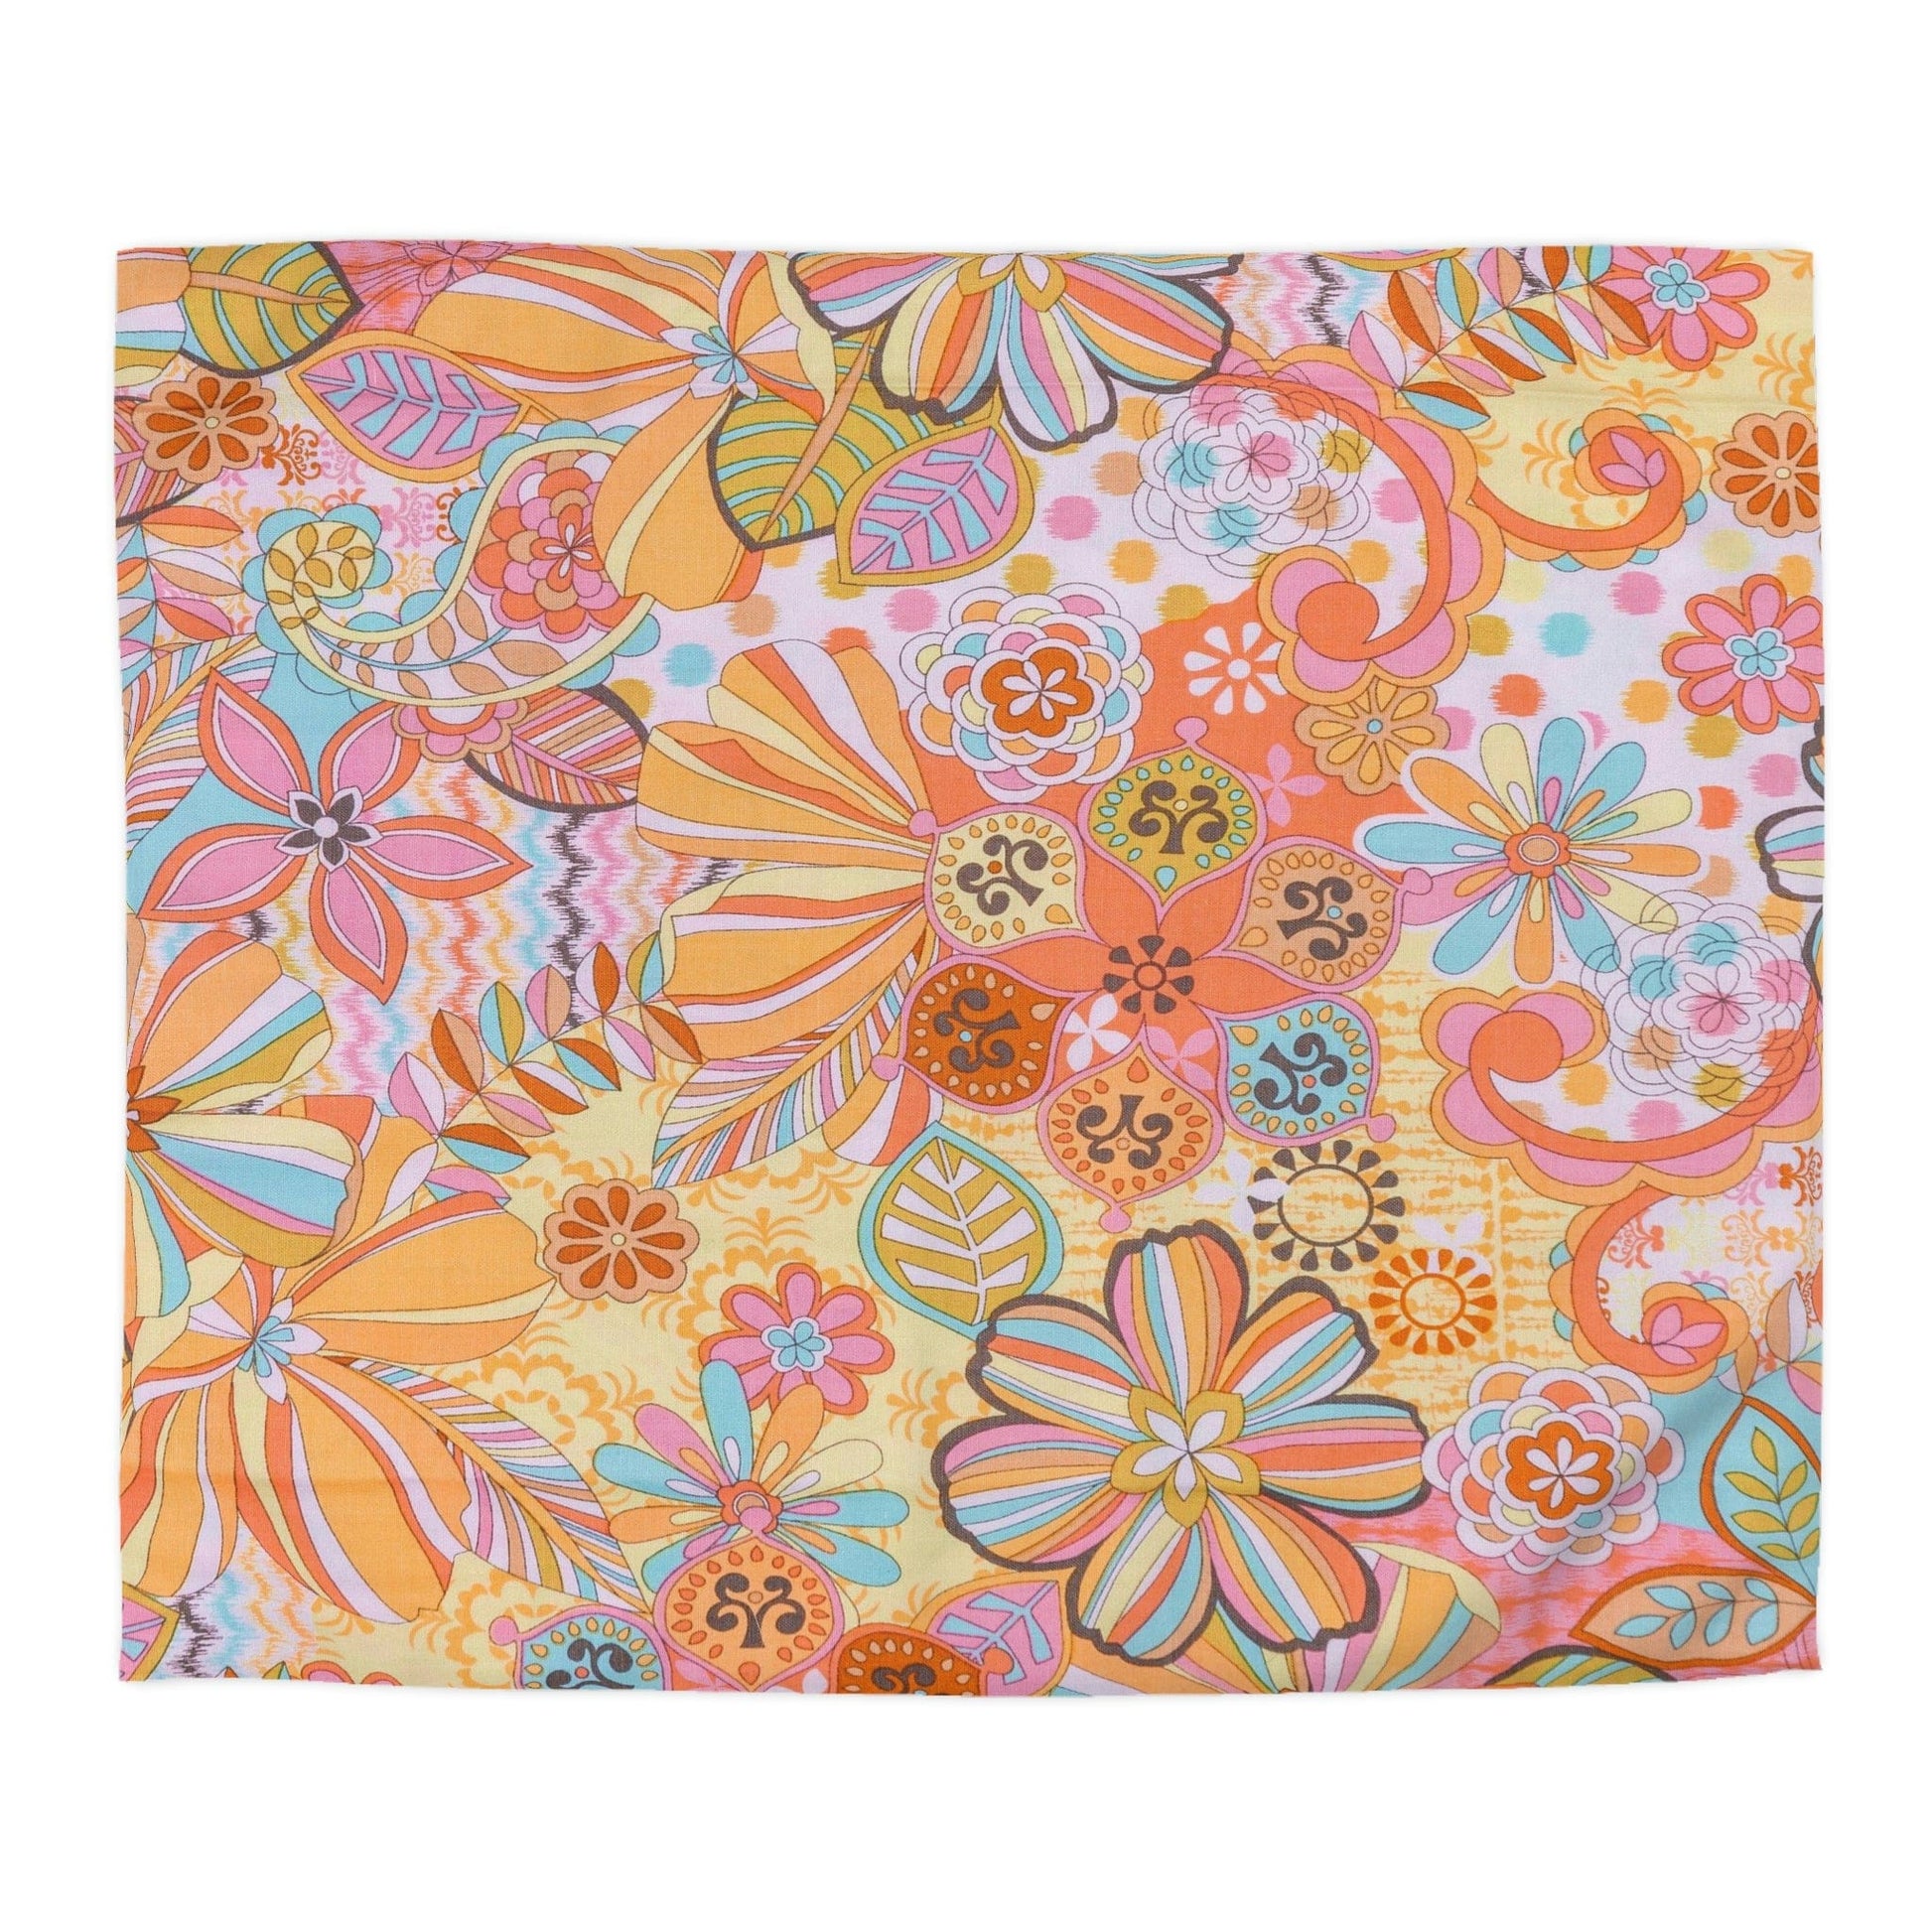 Kate McEnroe New York Retro Trippy Flower Power Duvet Cover, 70s Mid Mod Hippie Chic Floral Bedroom Decor with Groovy Orange, Yellow, and Blue Palette Duvet Covers King / Cream 29112472222830370817